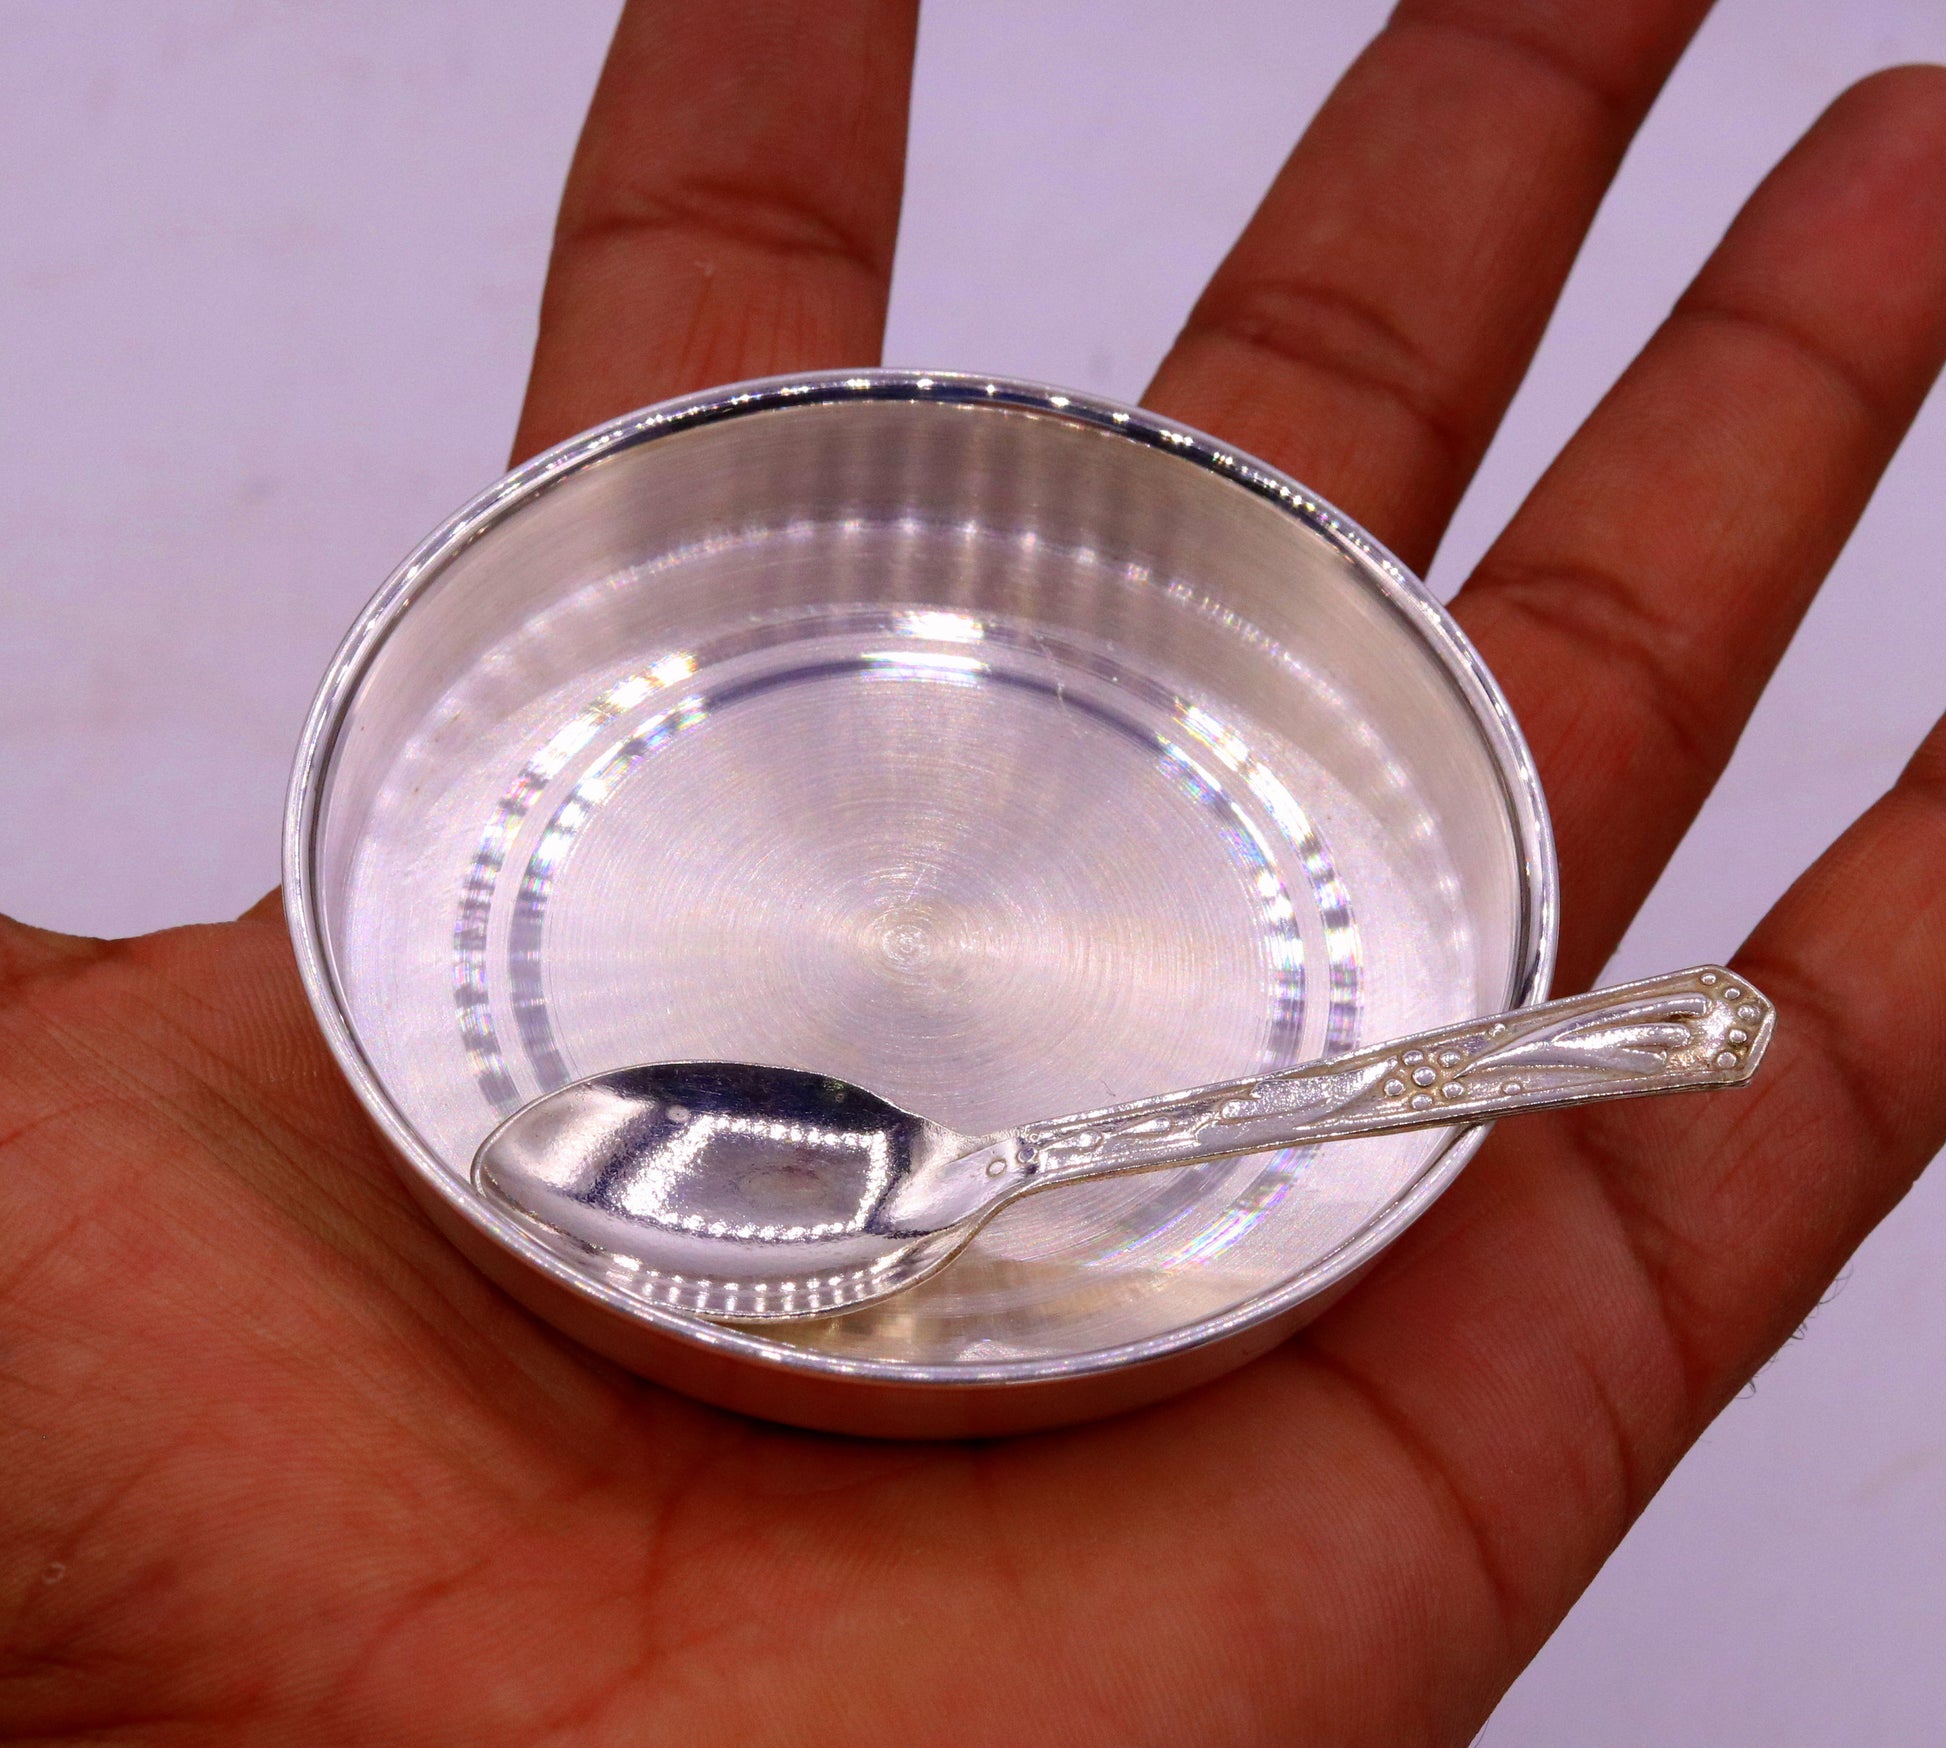 999 pure silver handmade silver baby plate and spoon set, silver has antibacterial properties, keep stay healthy, silver vessels sv08 - TRIBAL ORNAMENTS